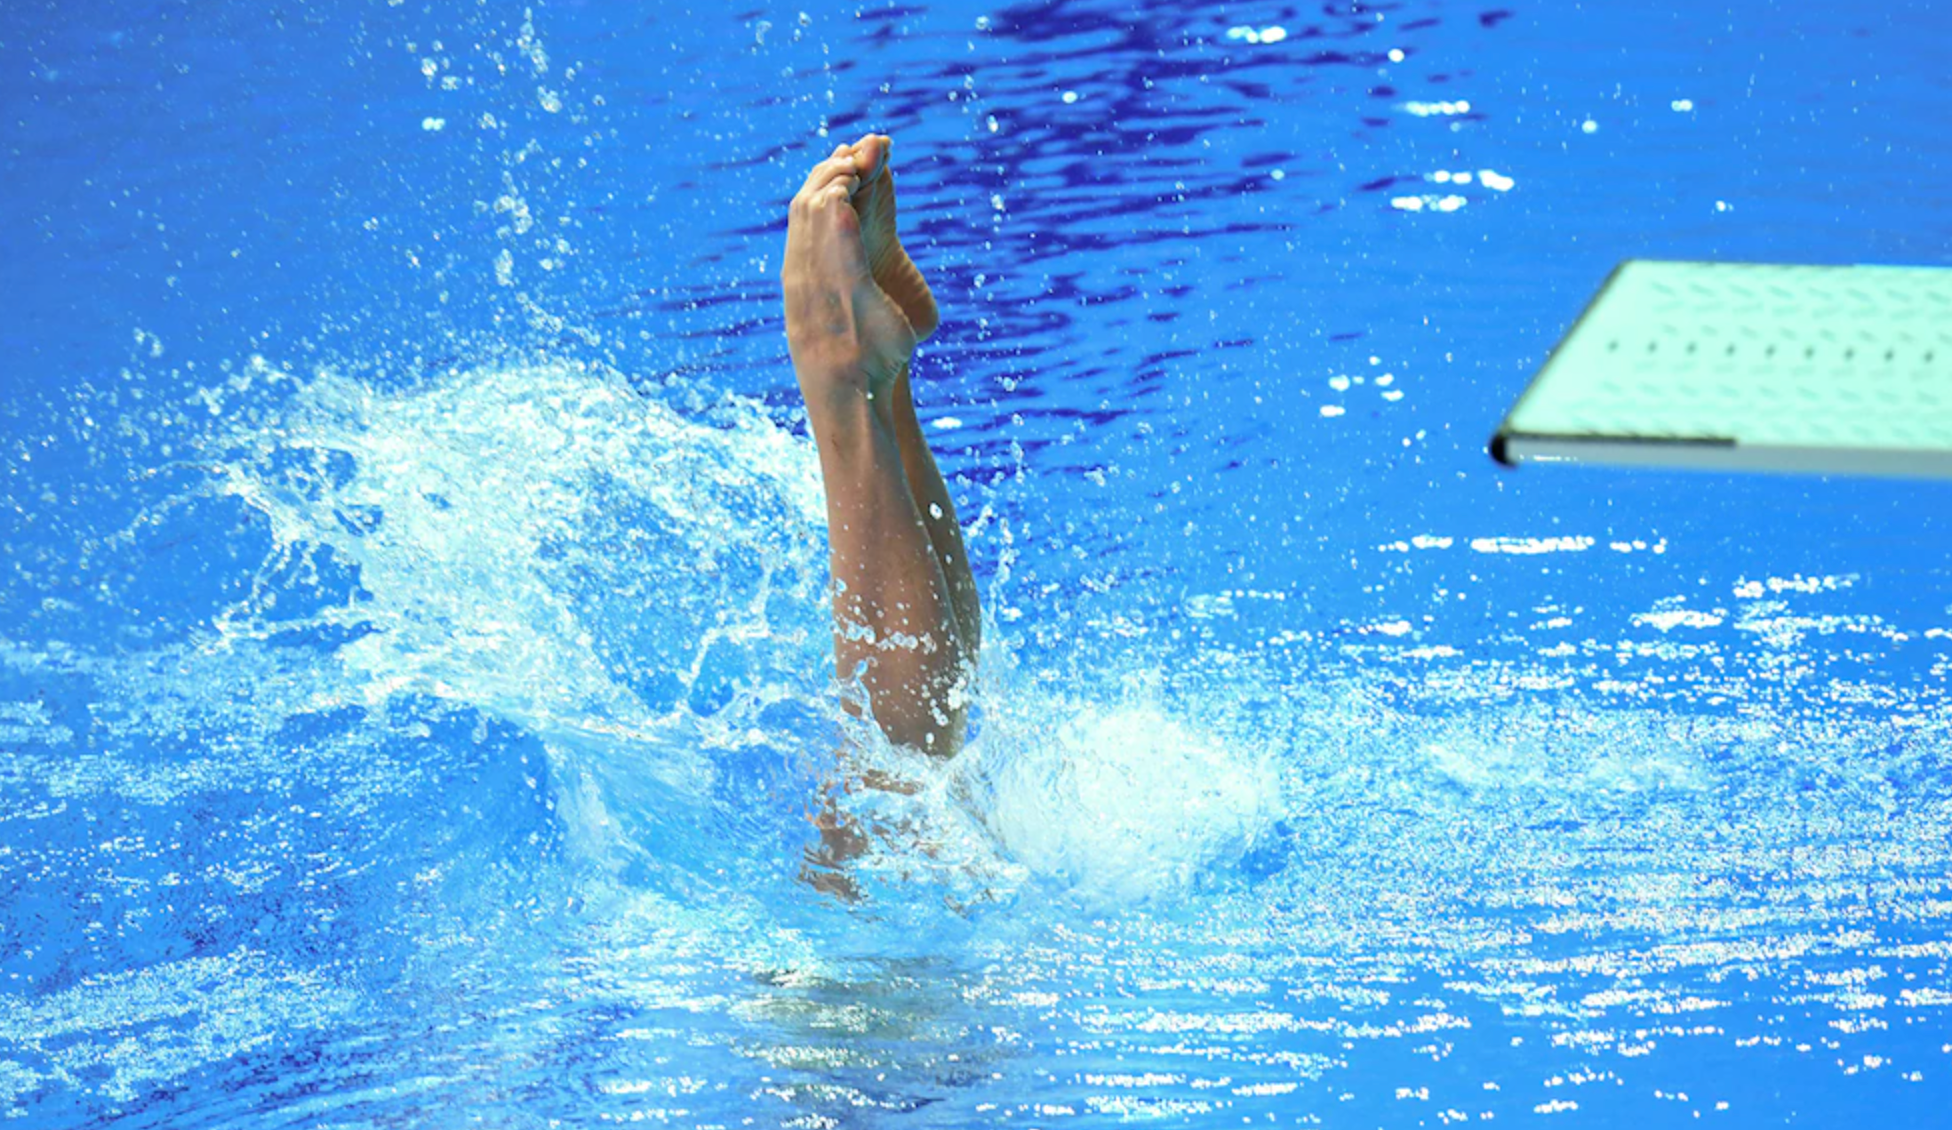 image search result from "Olympic diving one meter"